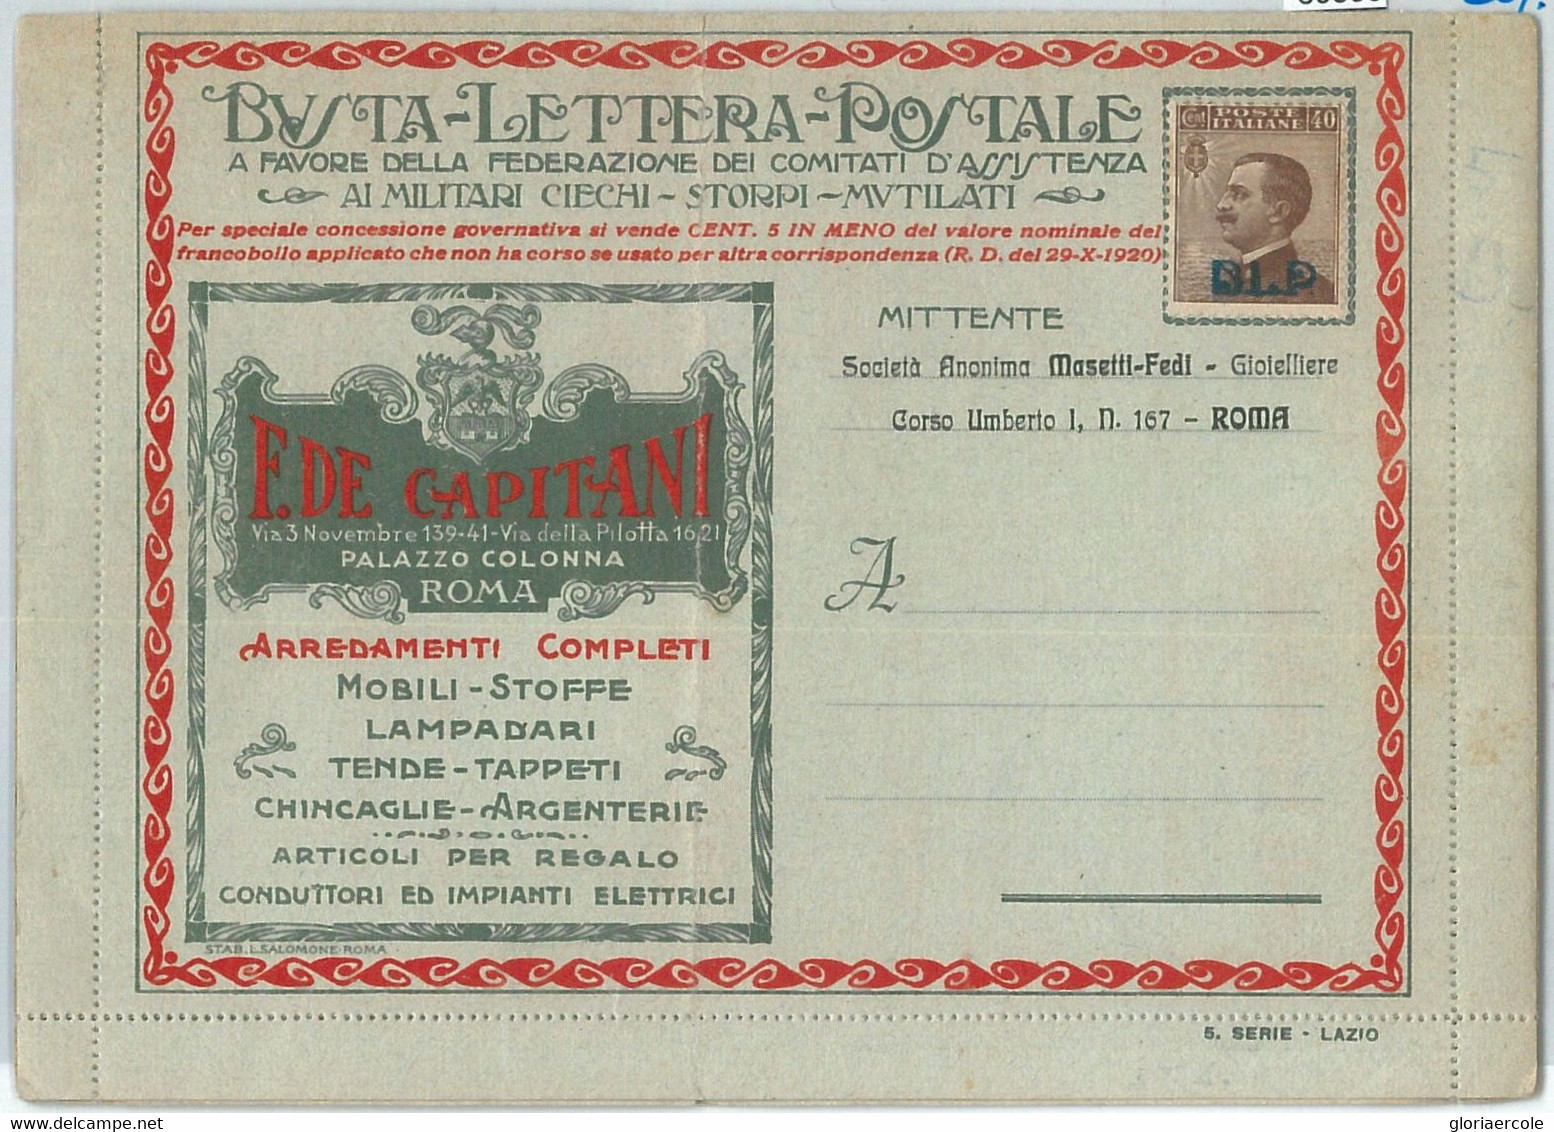 69595 - ITALY - POSTAL HISTORY - BLP  COVER # 4   - FURNITURE  Medicine  LIGHTS - Stamps For Advertising Covers (BLP)